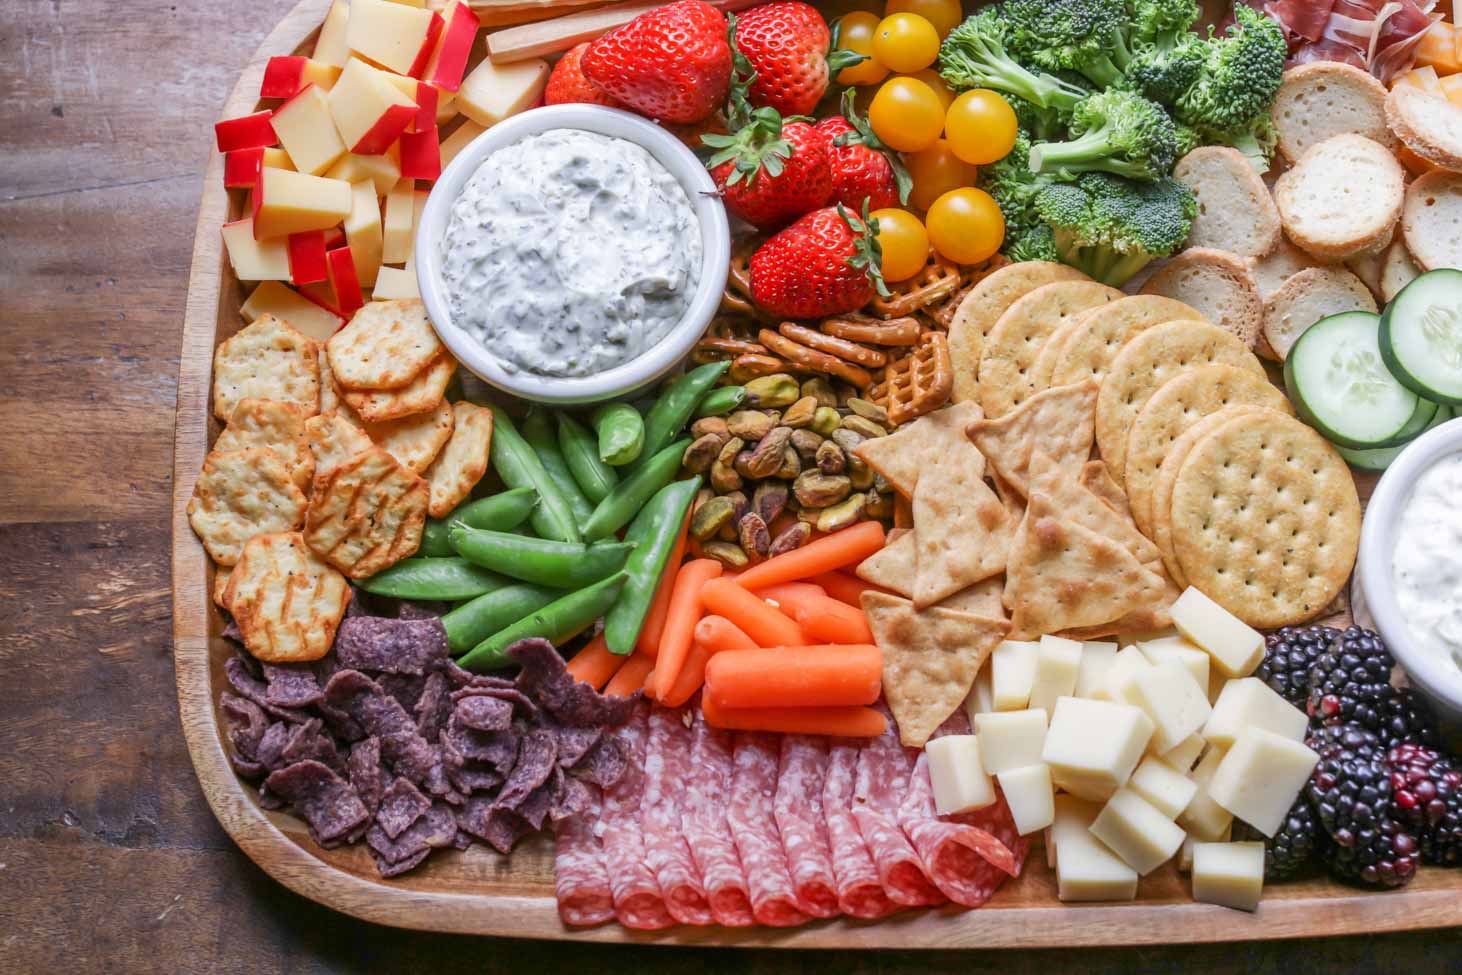 A wooden board piled high with charcuterie ingredients.